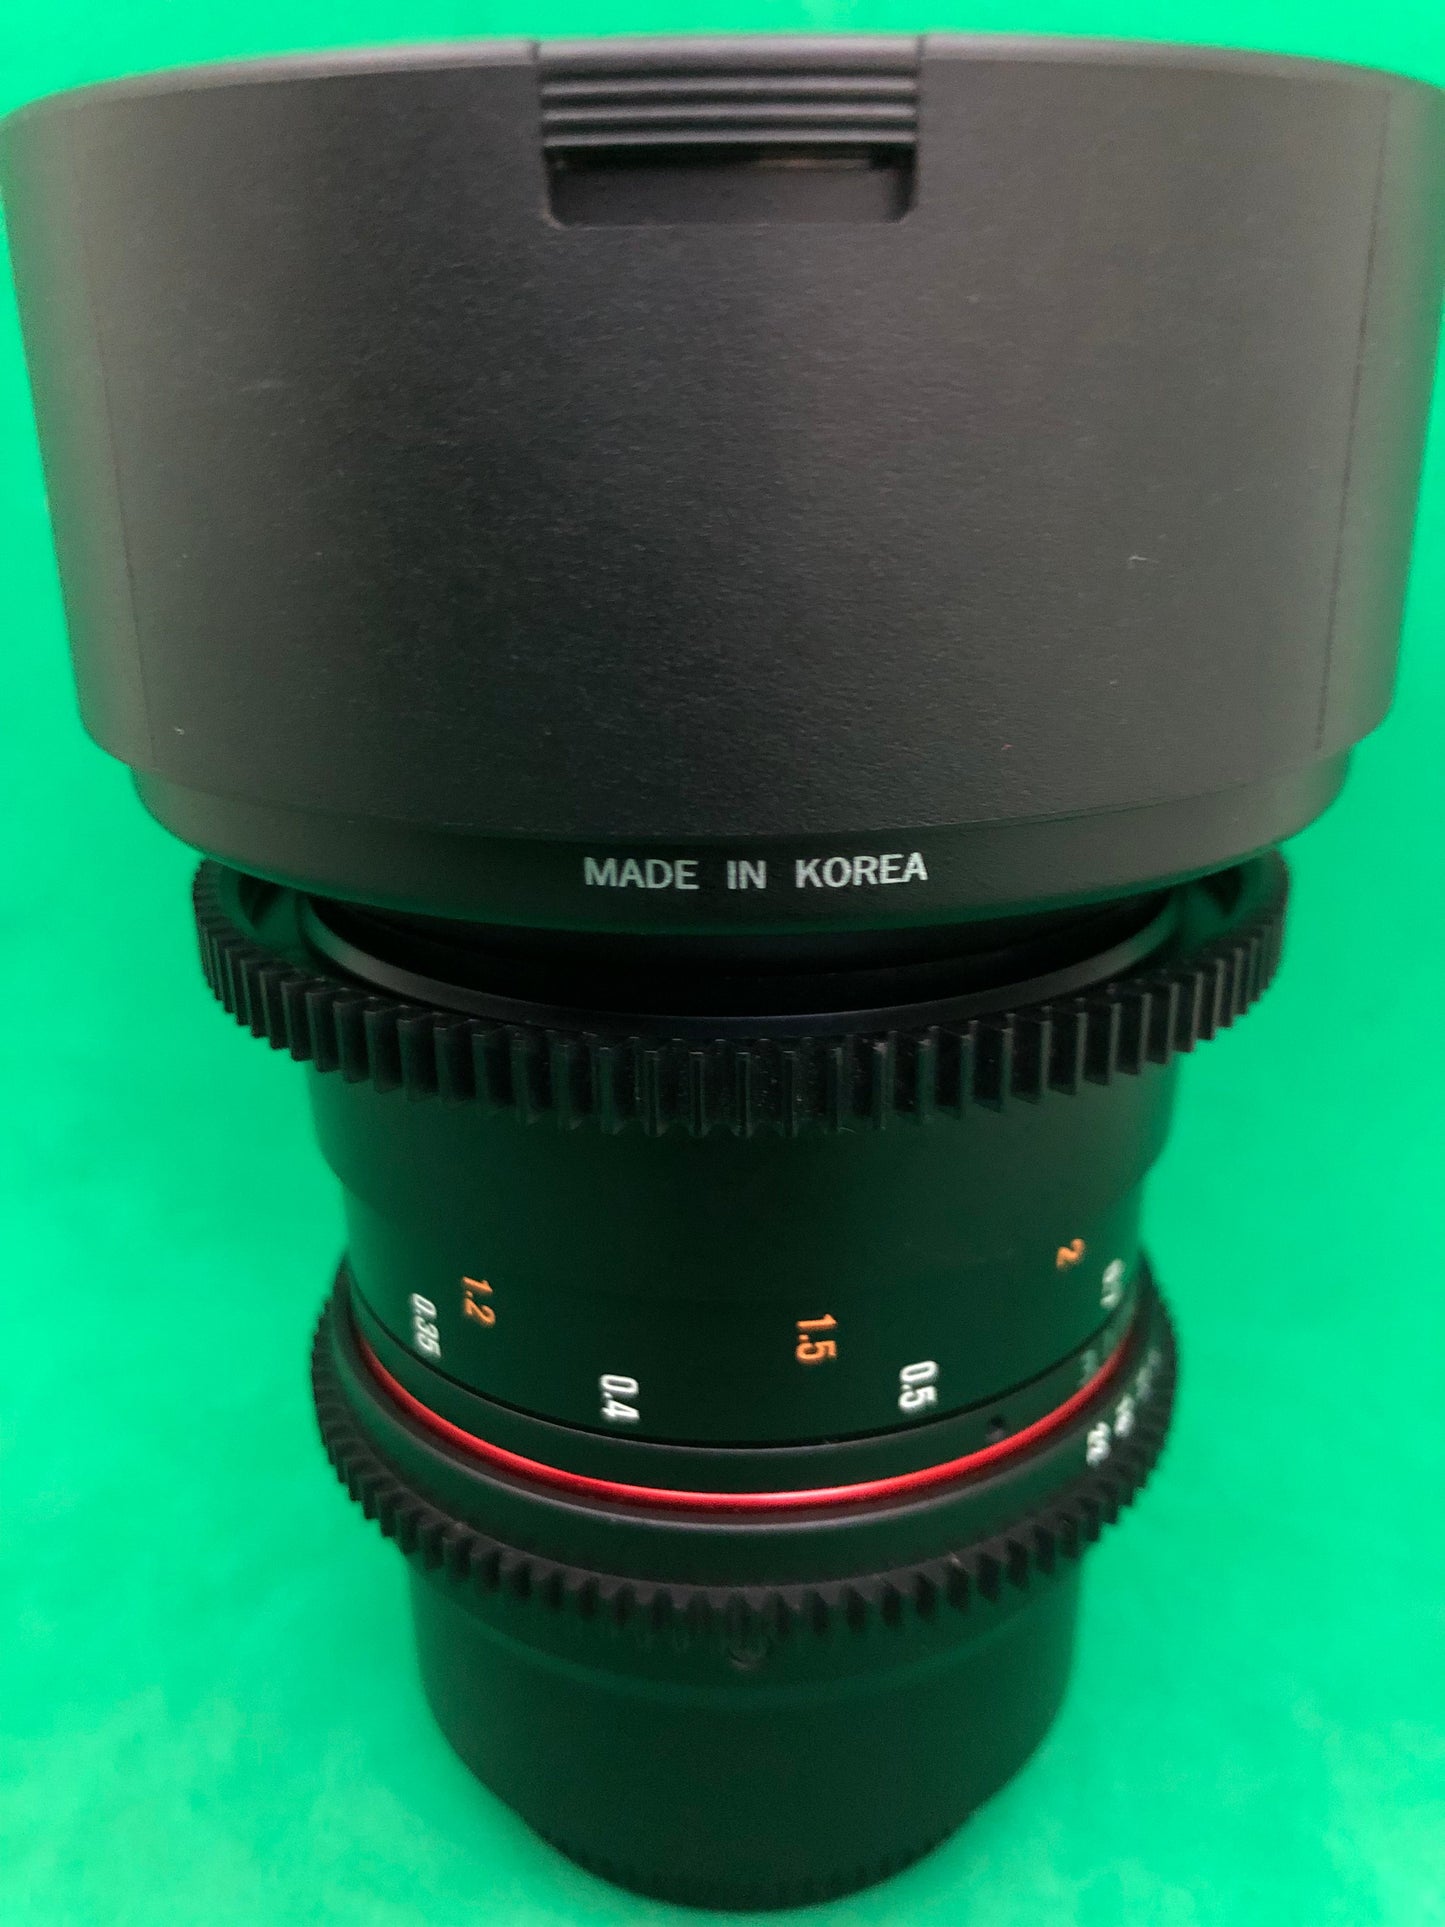 Rokinon 14mm T3.1 Cine DS Lens for Micro Four Thirds Mount